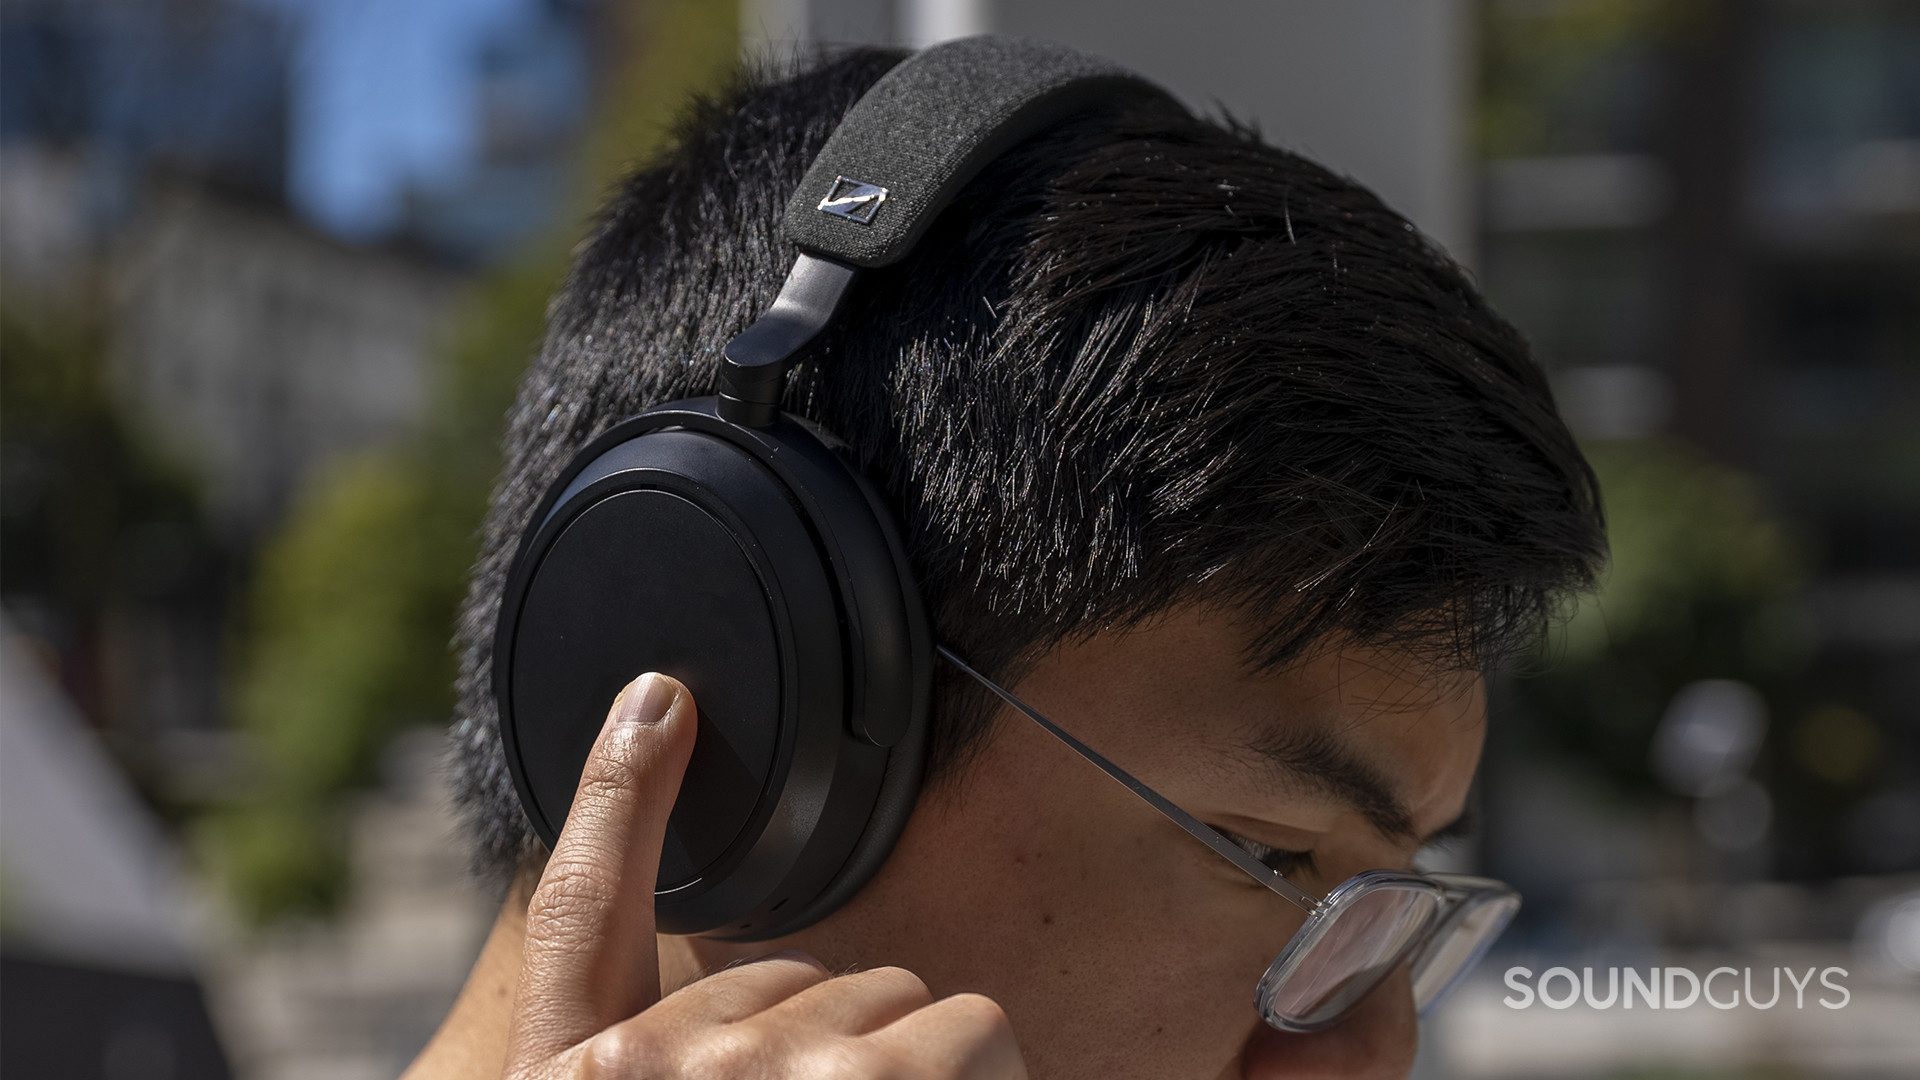 Sennheiser MOMENTUM 4 Wireless - Reviews  Headphone Reviews and Discussion  